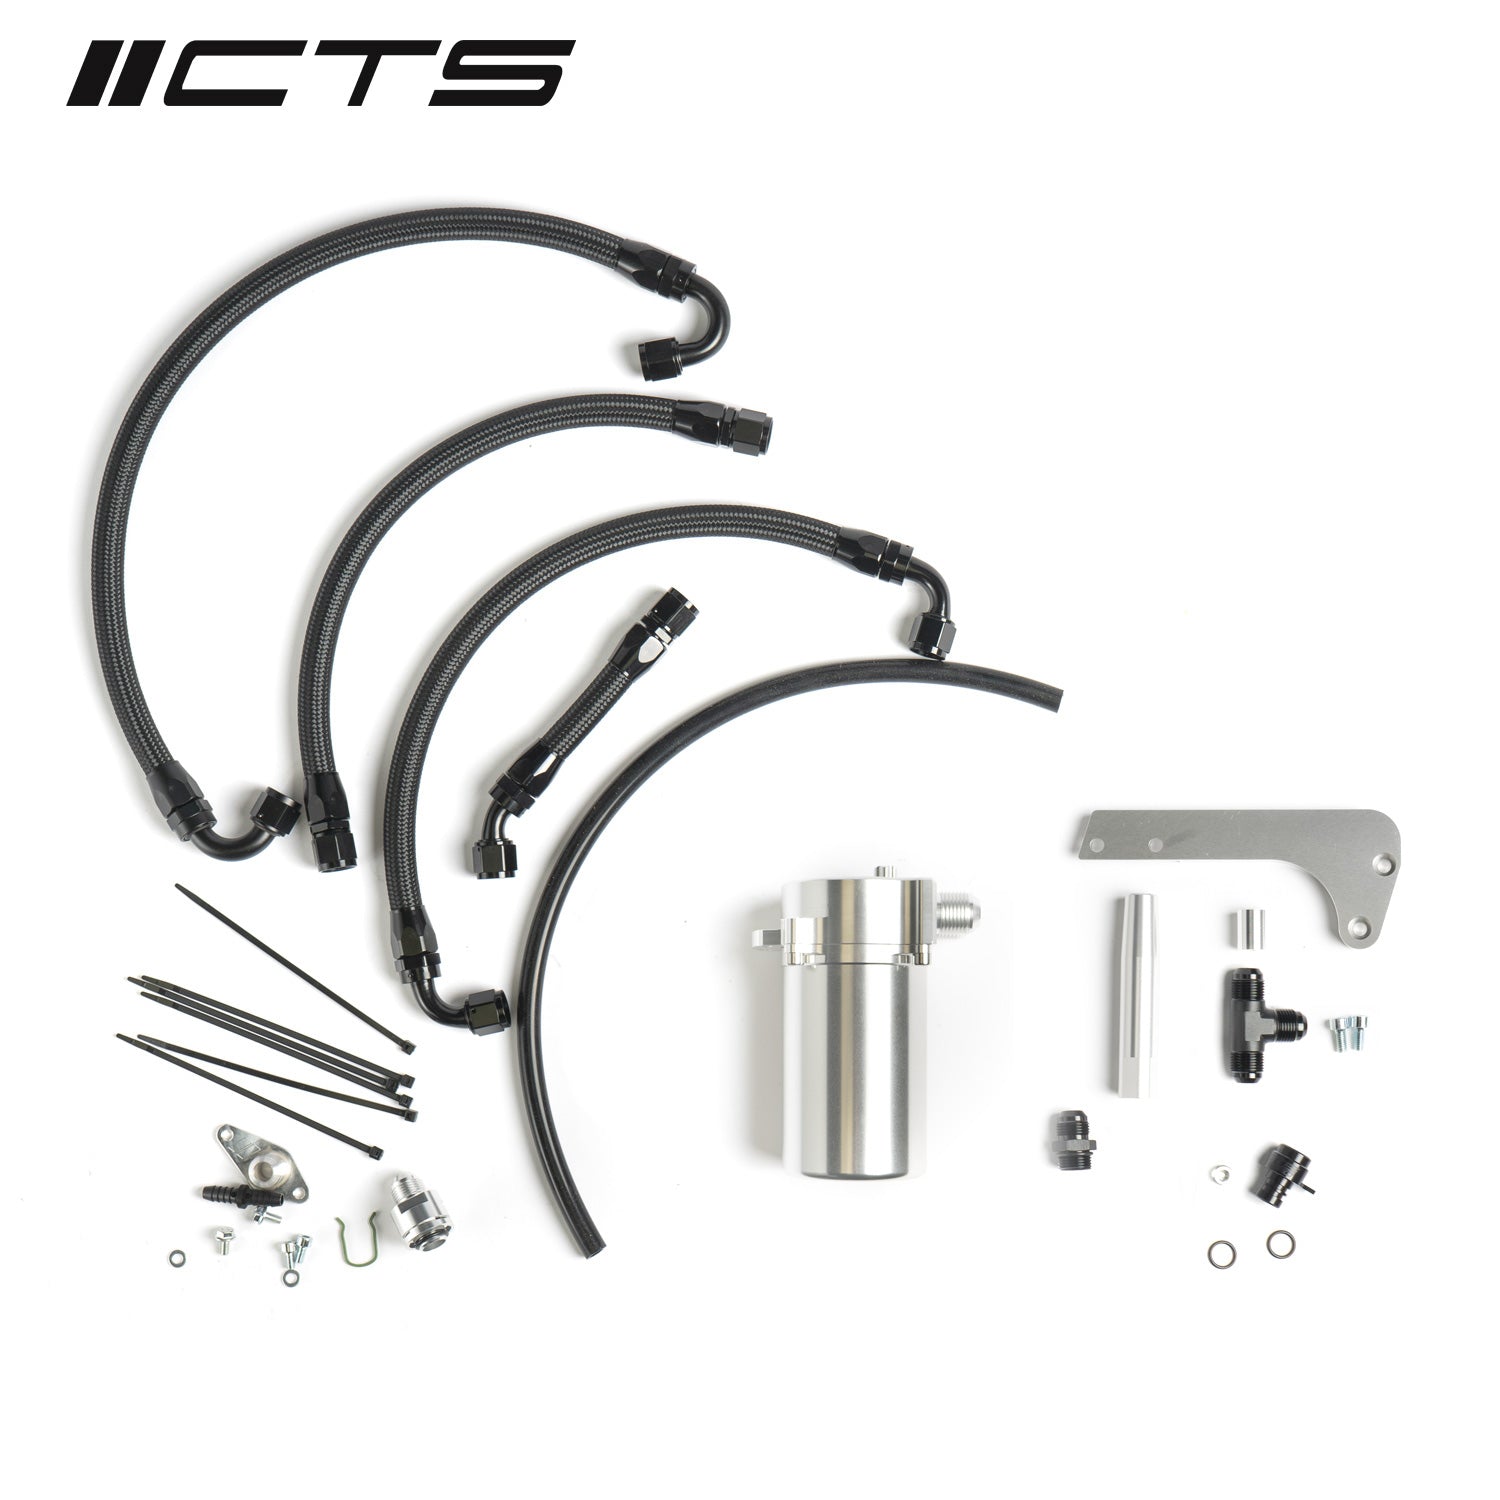 CTS TURBO MK5 FSI CATCH CAN KIT FOR BILLET VALVE COVER